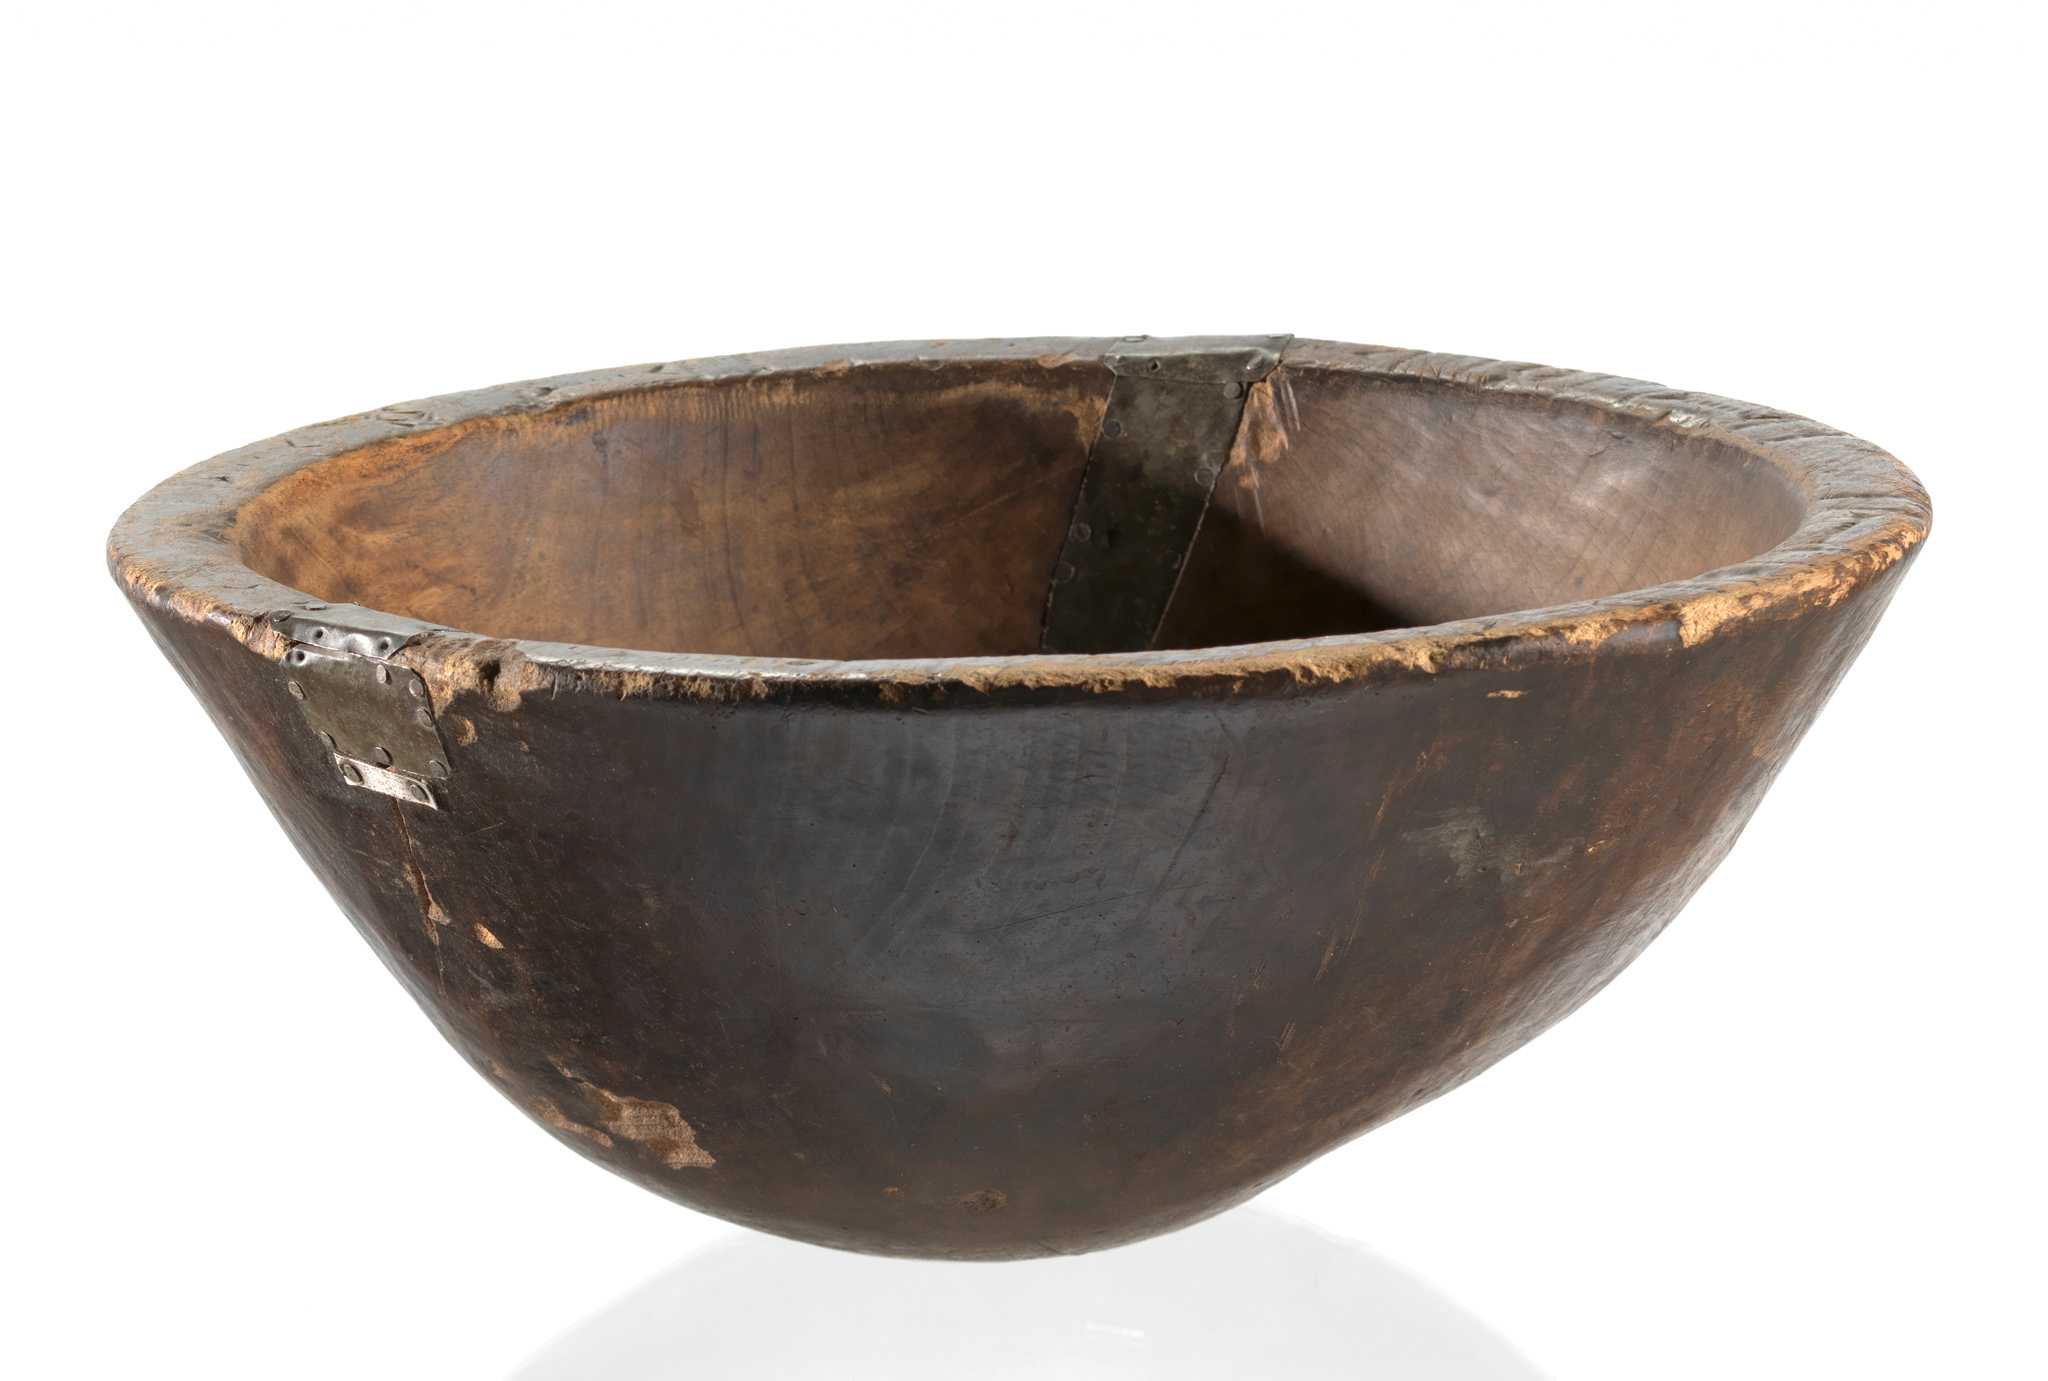 Photograph of large wooden bowl